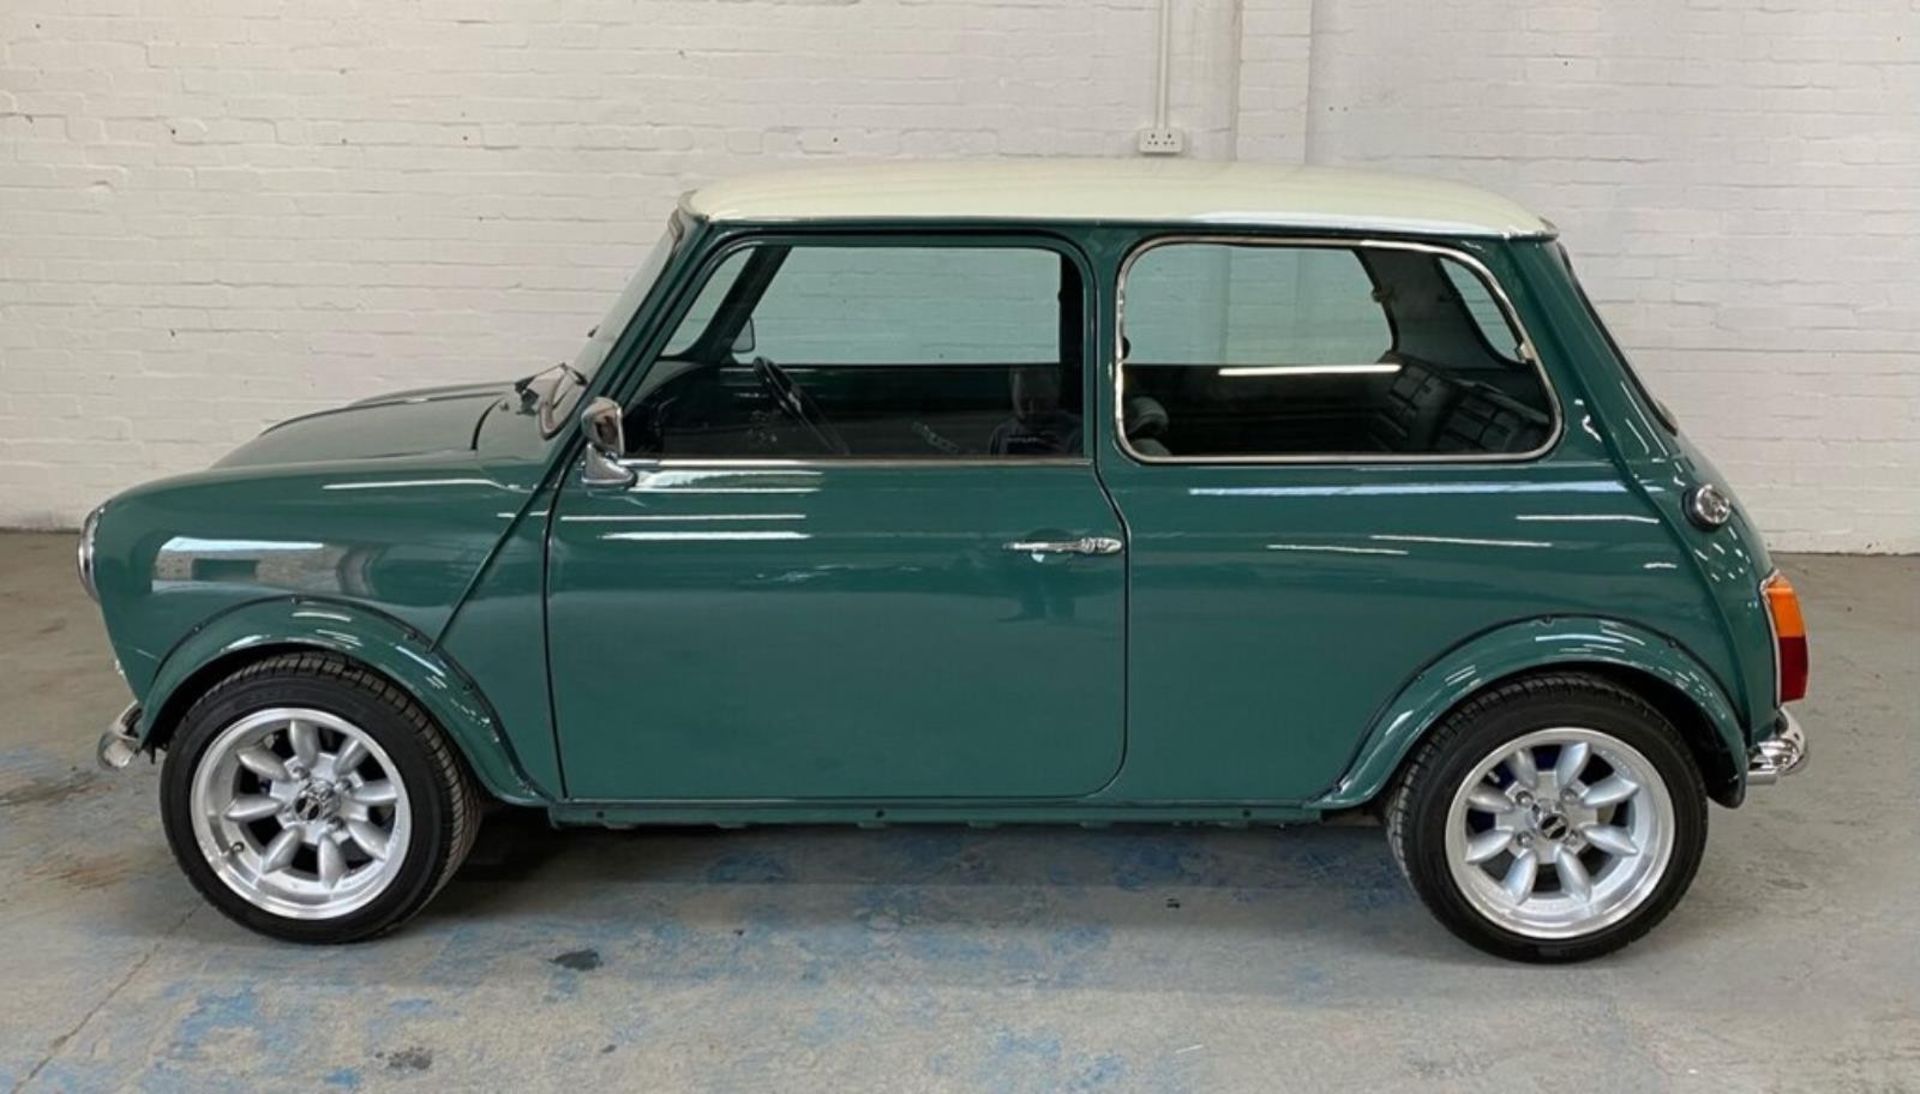 1971 Mini Cooper S Recreation Registration number KFB 656J Green with a white roof Black interior - Image 6 of 18